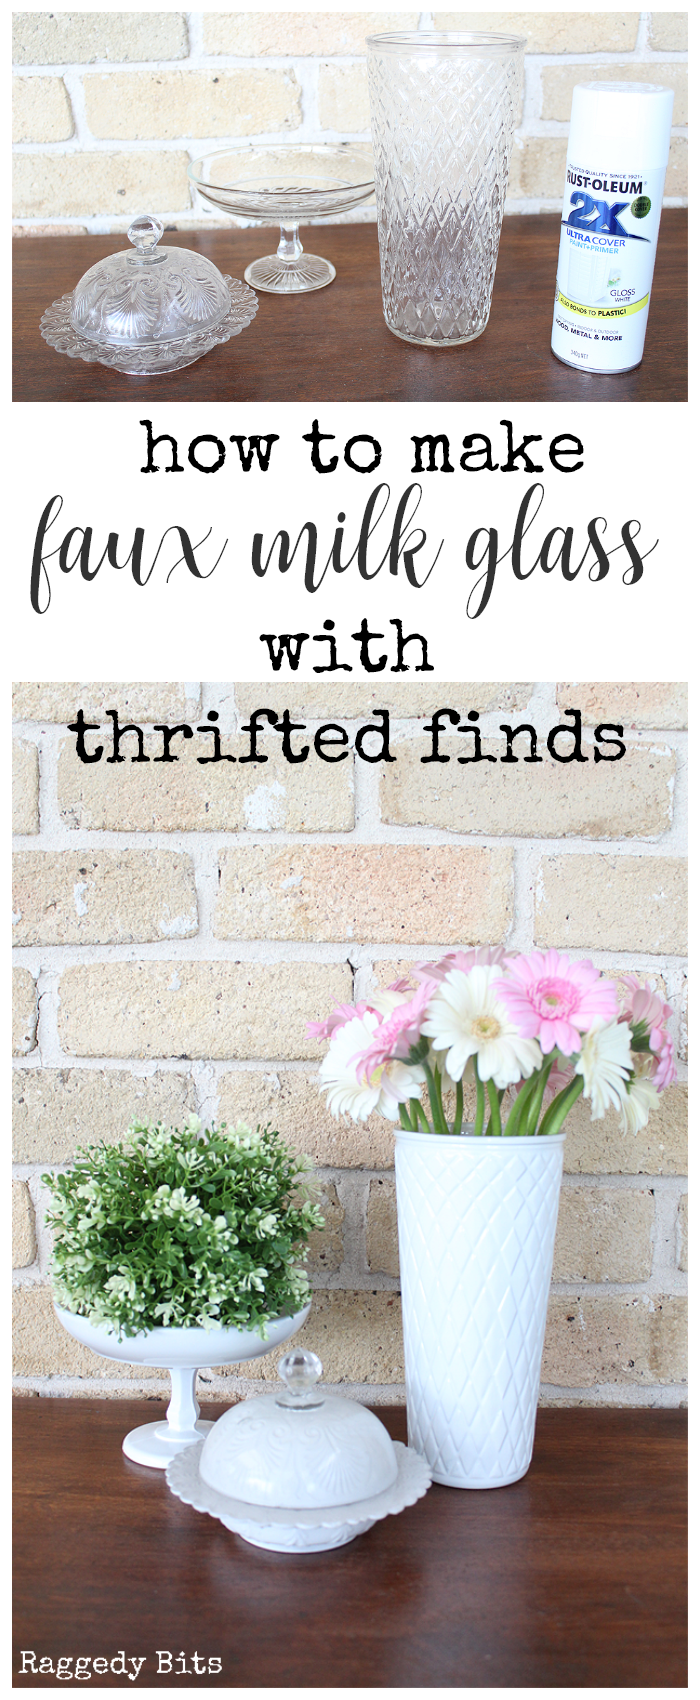 How to make Faux Milk Glass with Thrifted Finds - How to make Faux Milk Glass with Thrifted Finds -   16 action diy Decorations ideas